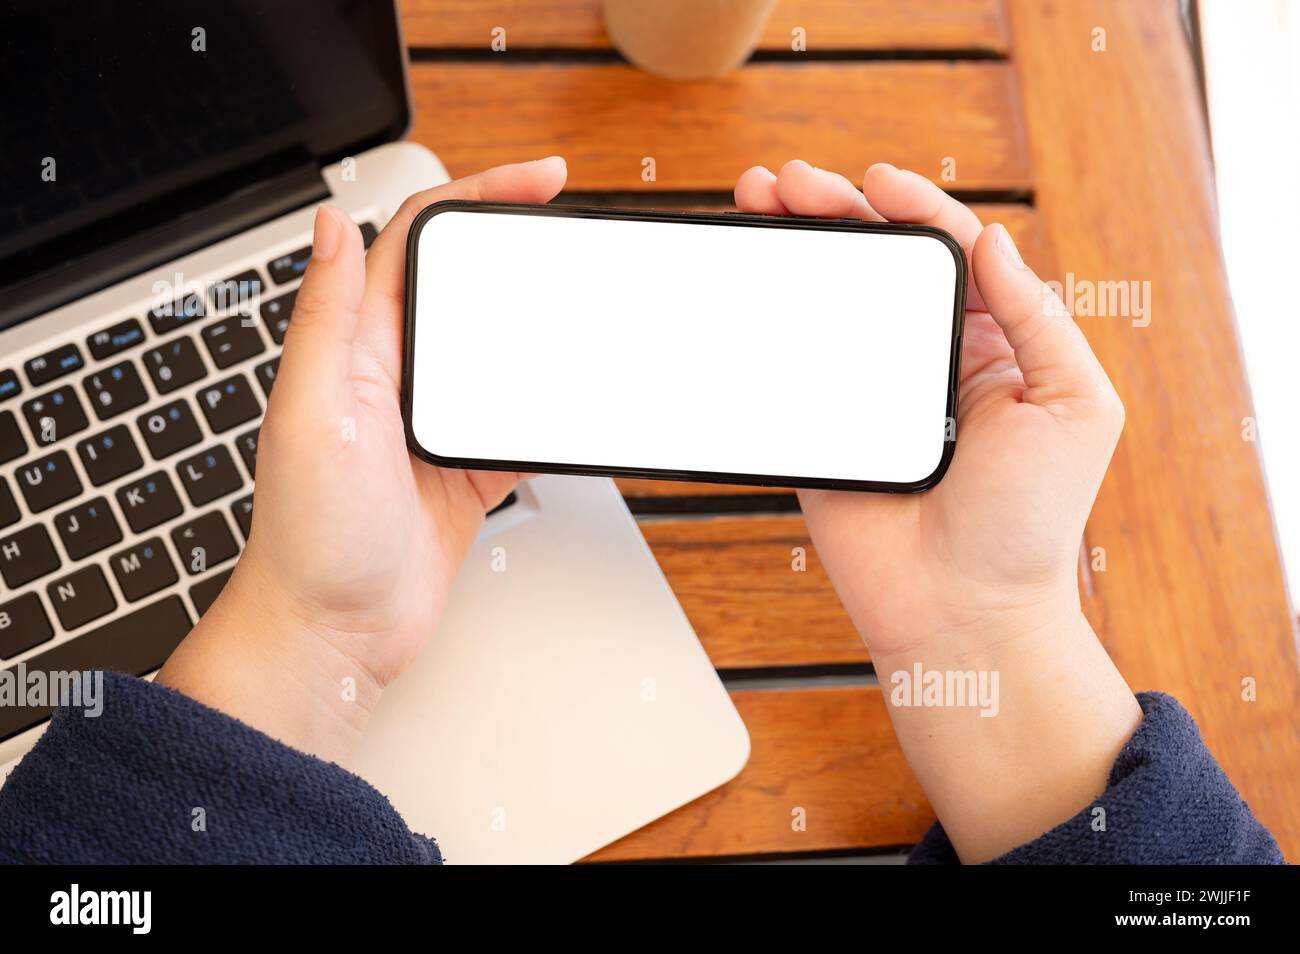 A top view image of a woman holding a white-screen smartphone mockup in a horizontal position, using her smartphone at a table indoors. Stock Photo